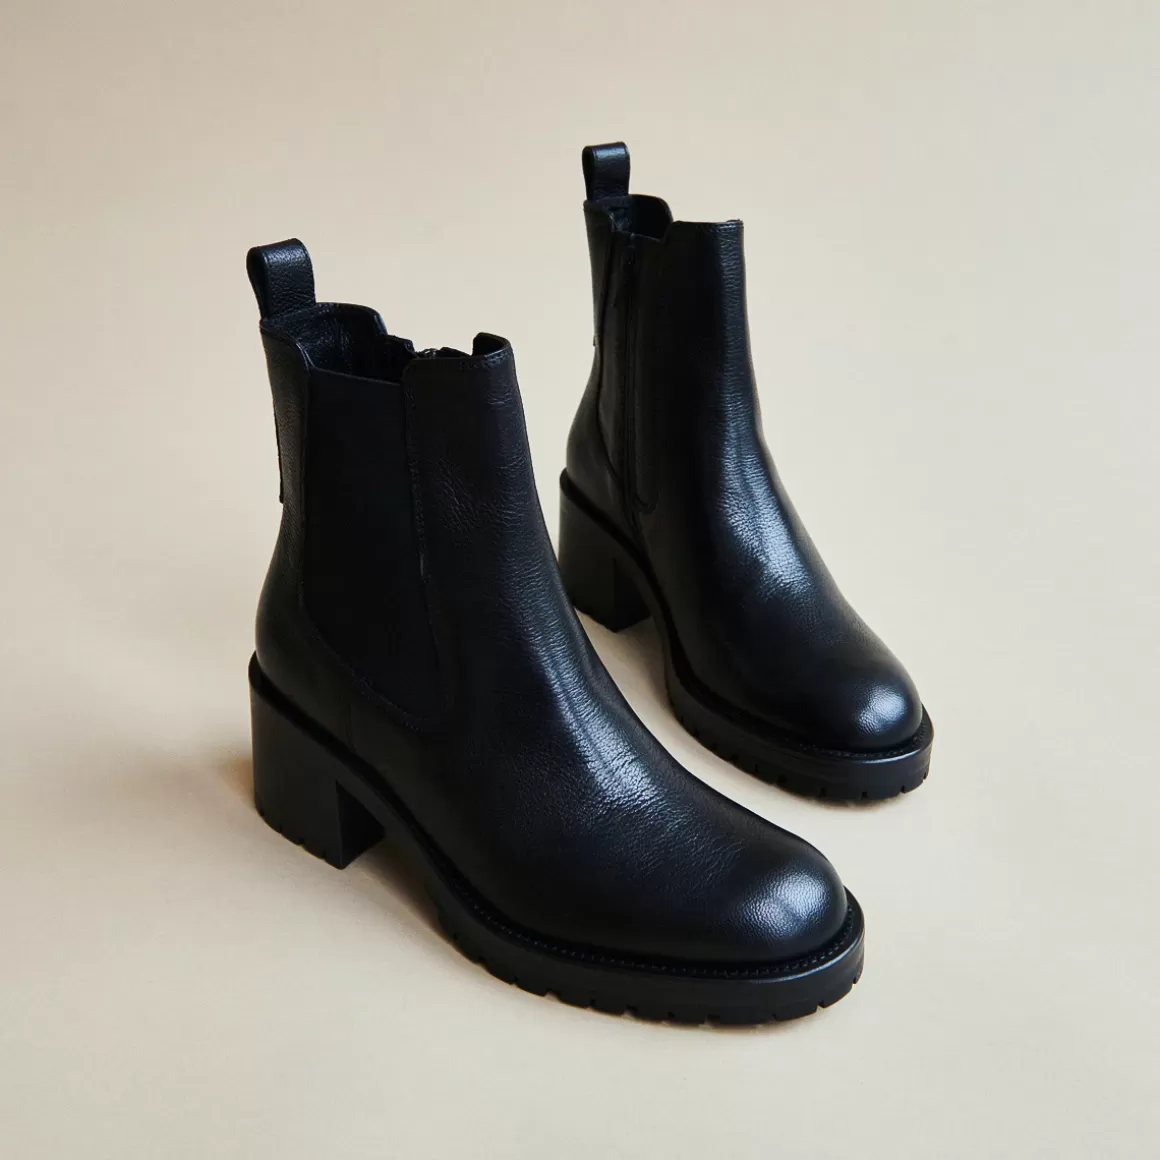 High boots with notched soles<Jonak New